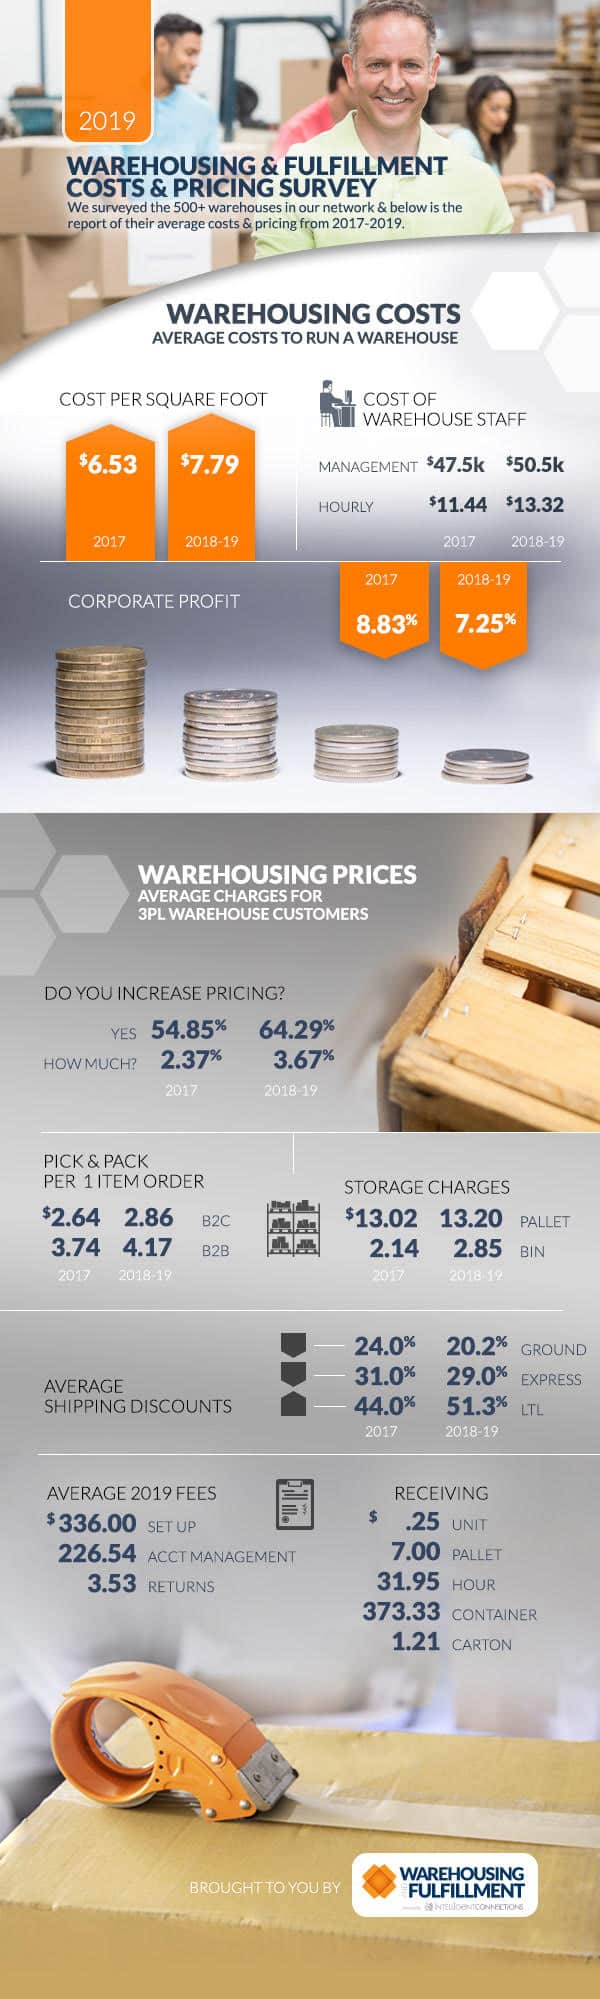 2019 Warehousing and Fulfillment Pricing and Costs Survey